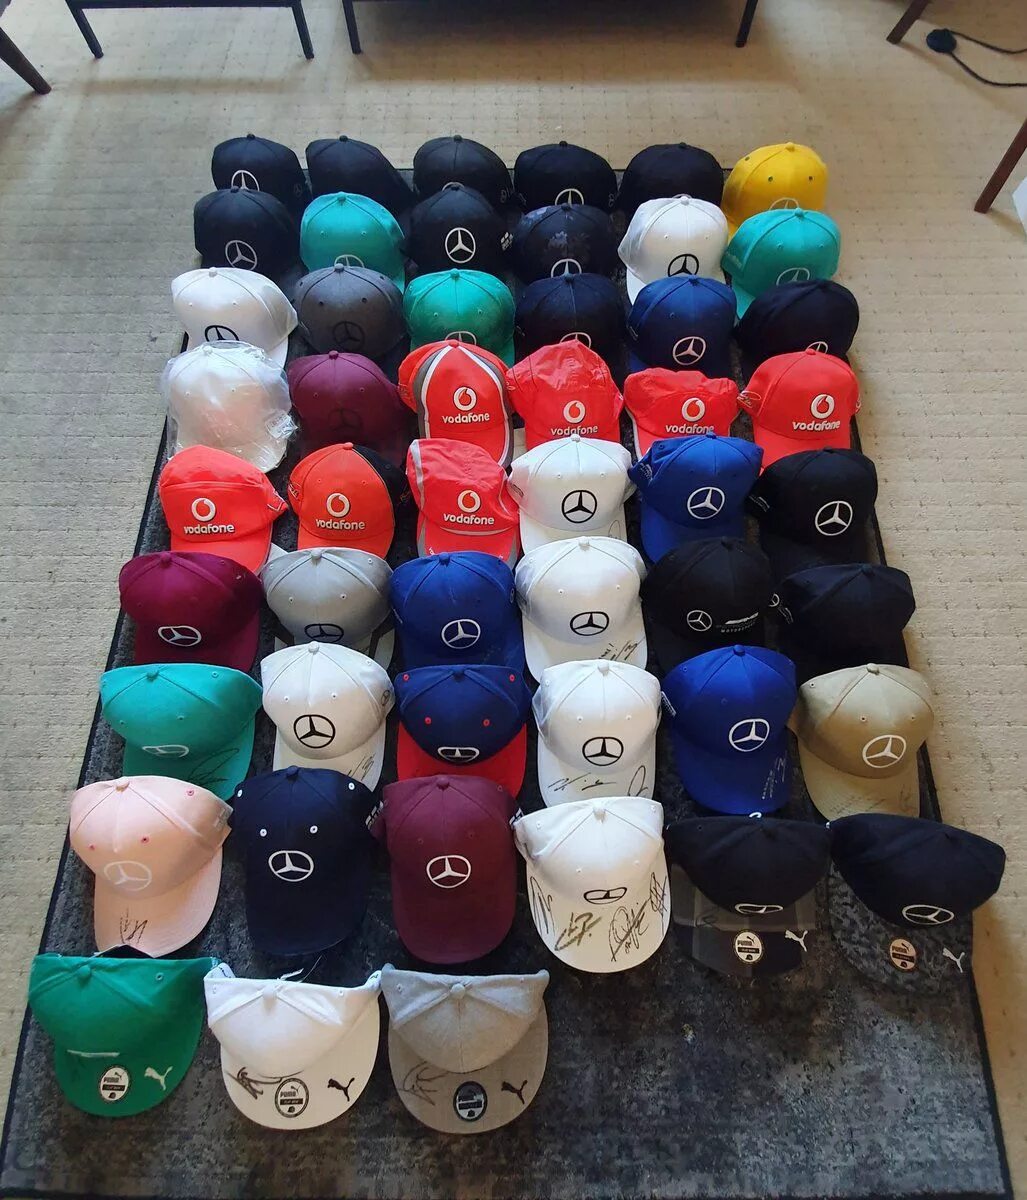 Which Color of caps are more popular.